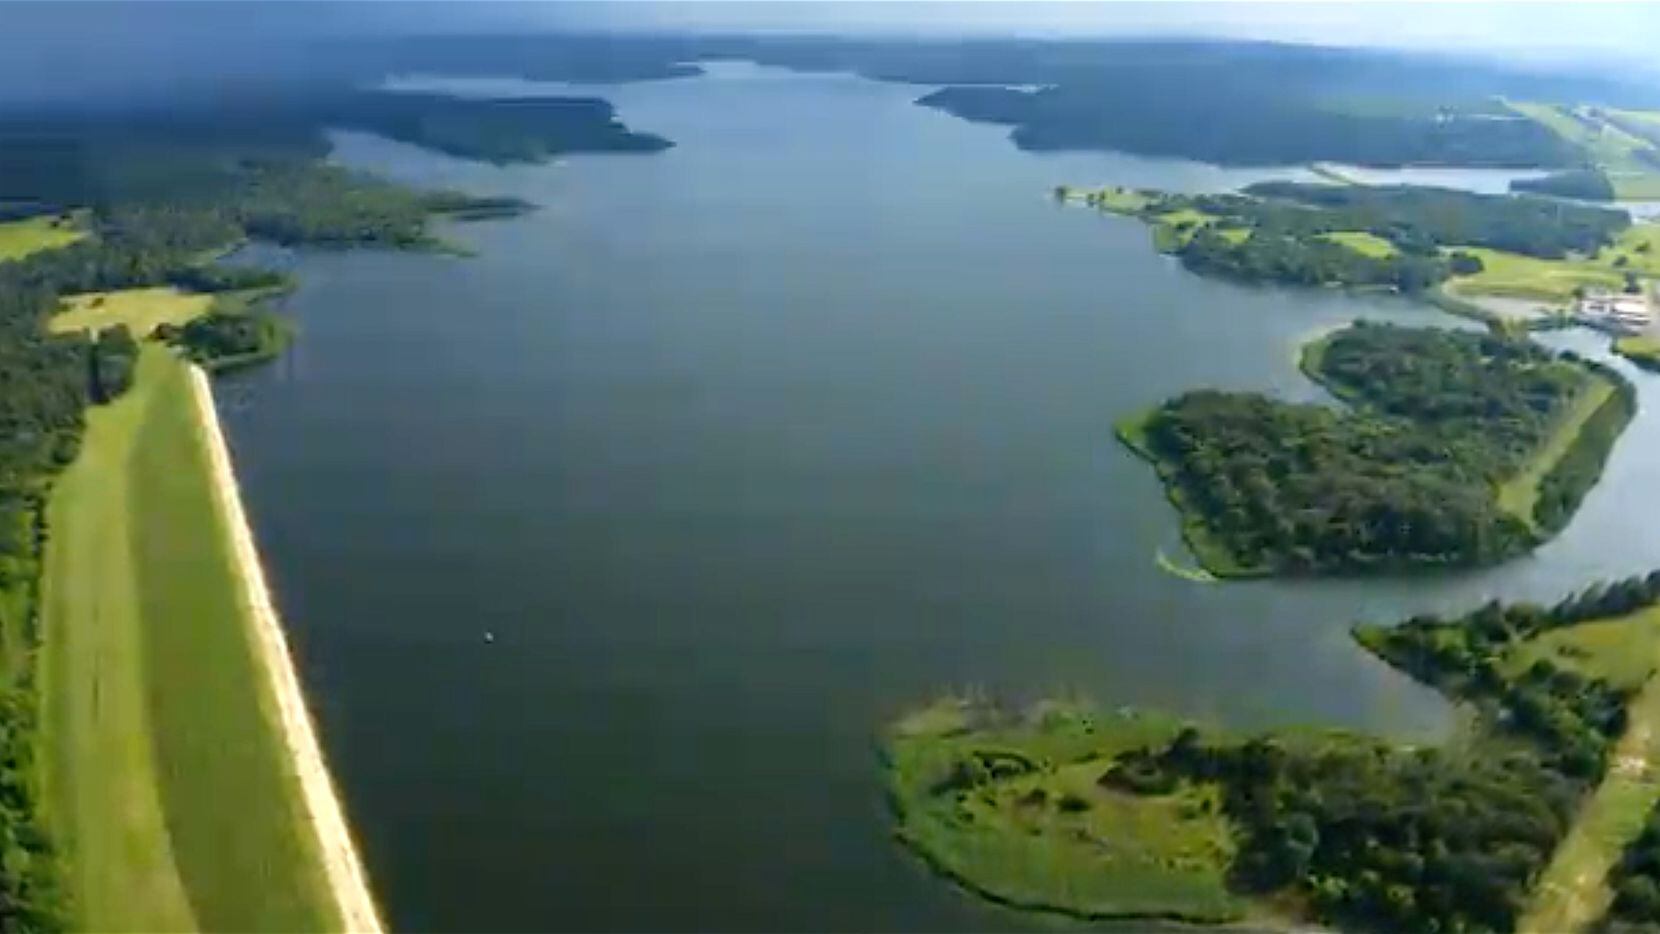 Fairfield Lake is 90 miles south of Dallas near Interstate 45.